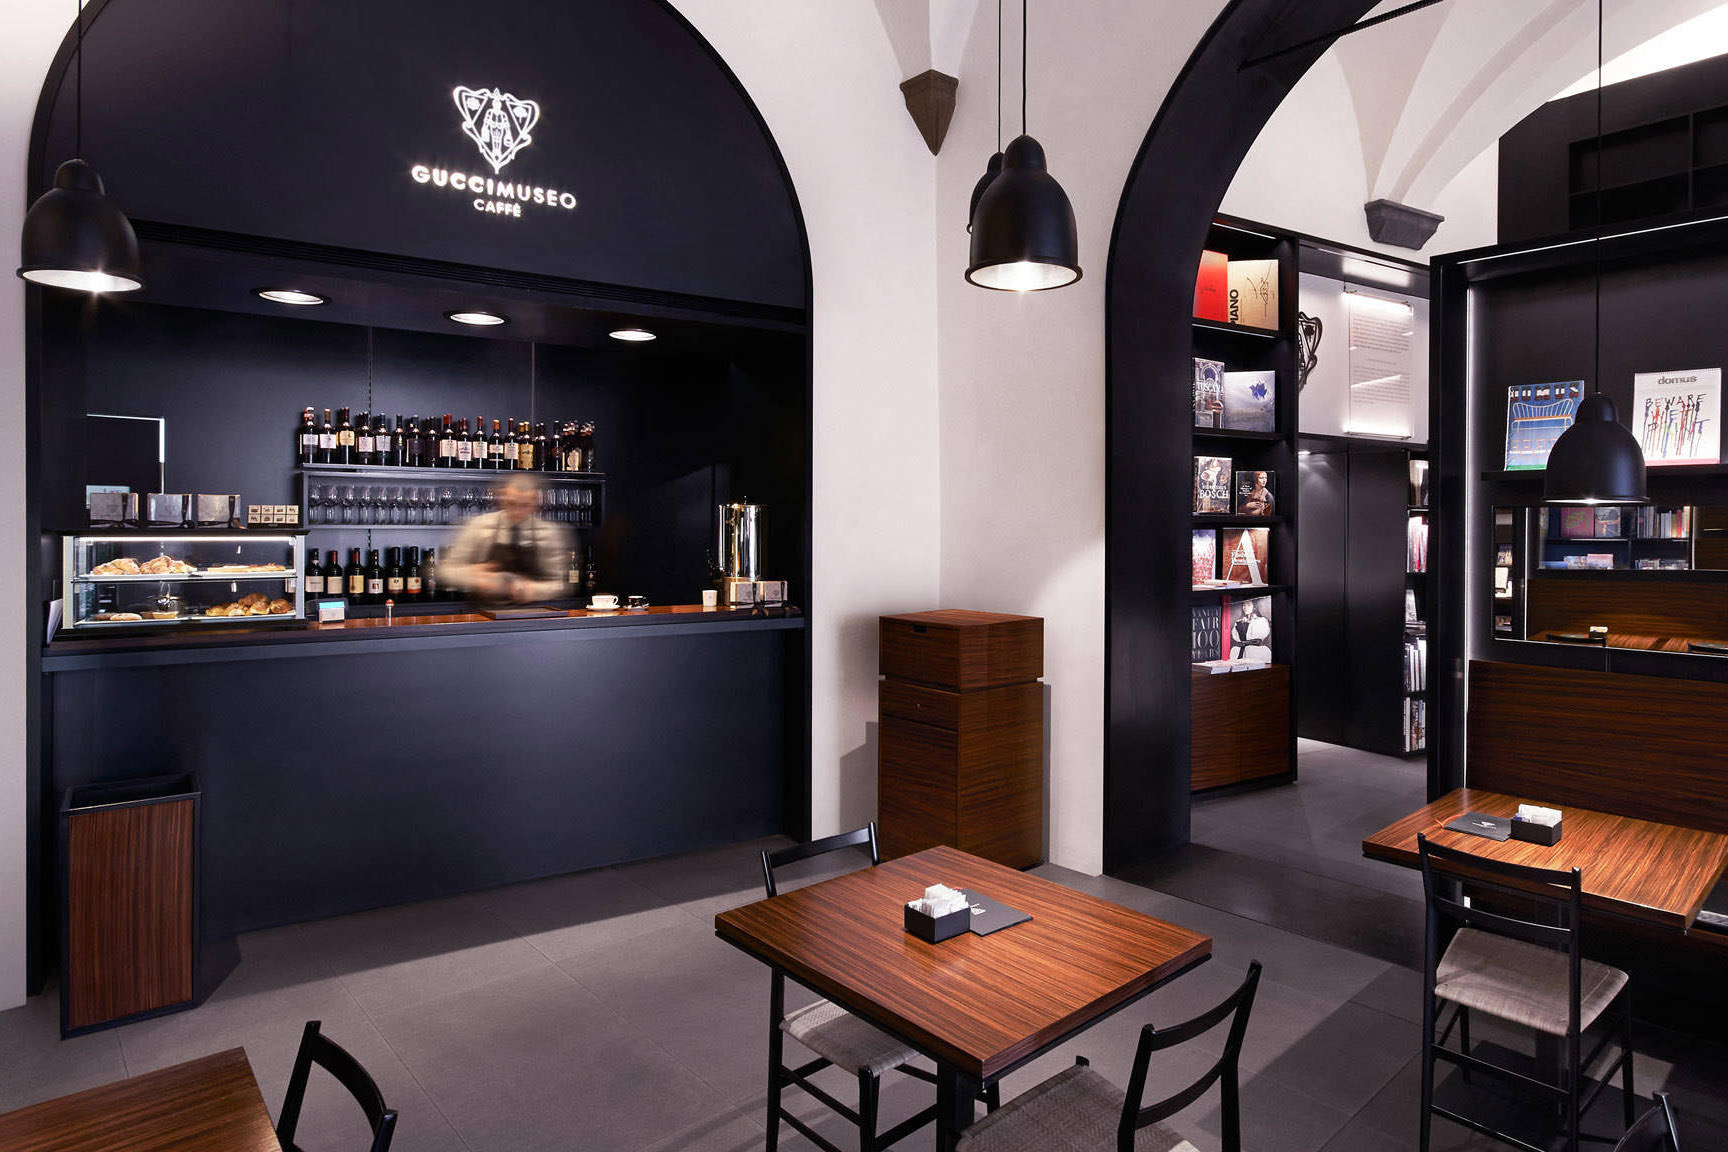 Gather-mag_Florence_dine_drink_Gucci-Museo-Caffe-Restaurant_mini